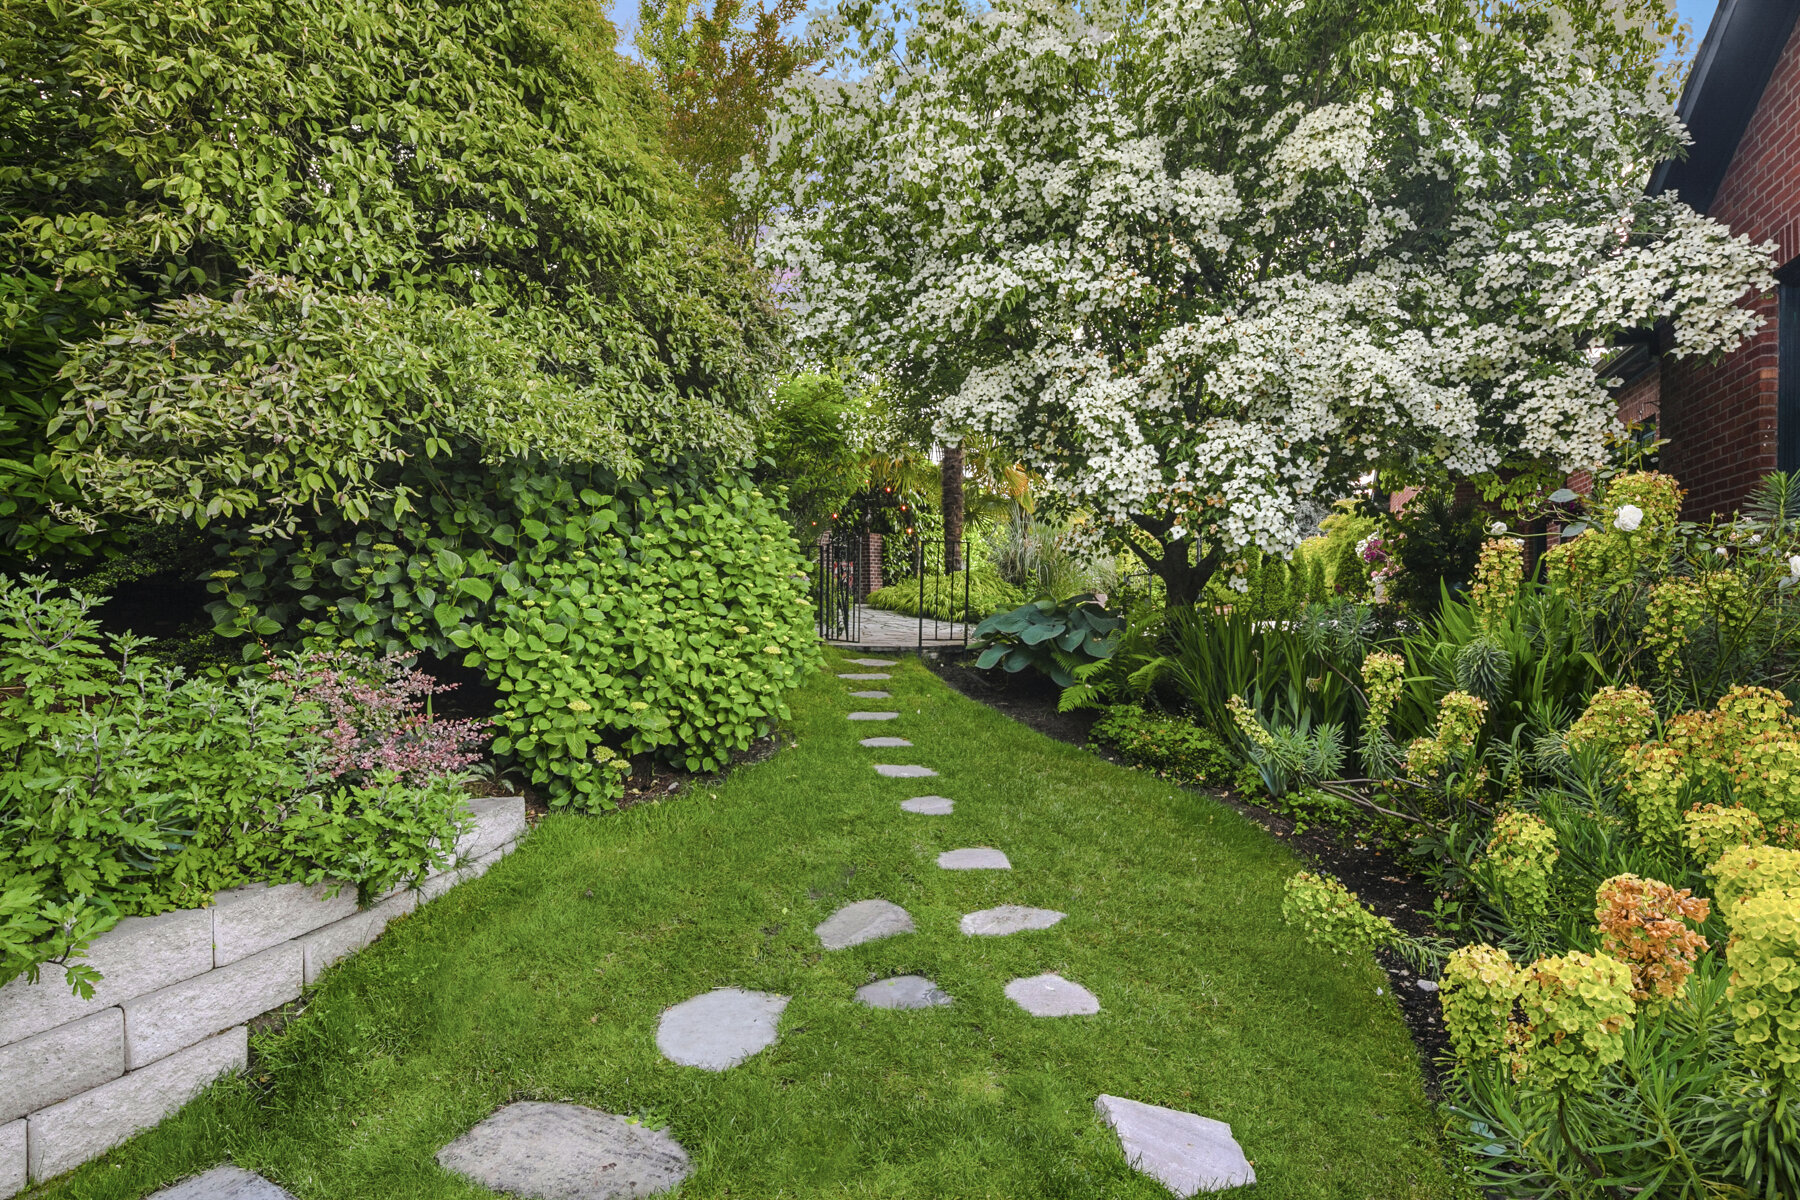  Multiple spectacular settings for entertaining include the stone pathway along the west side of the the property through mature plantings toward Lake Washington.    